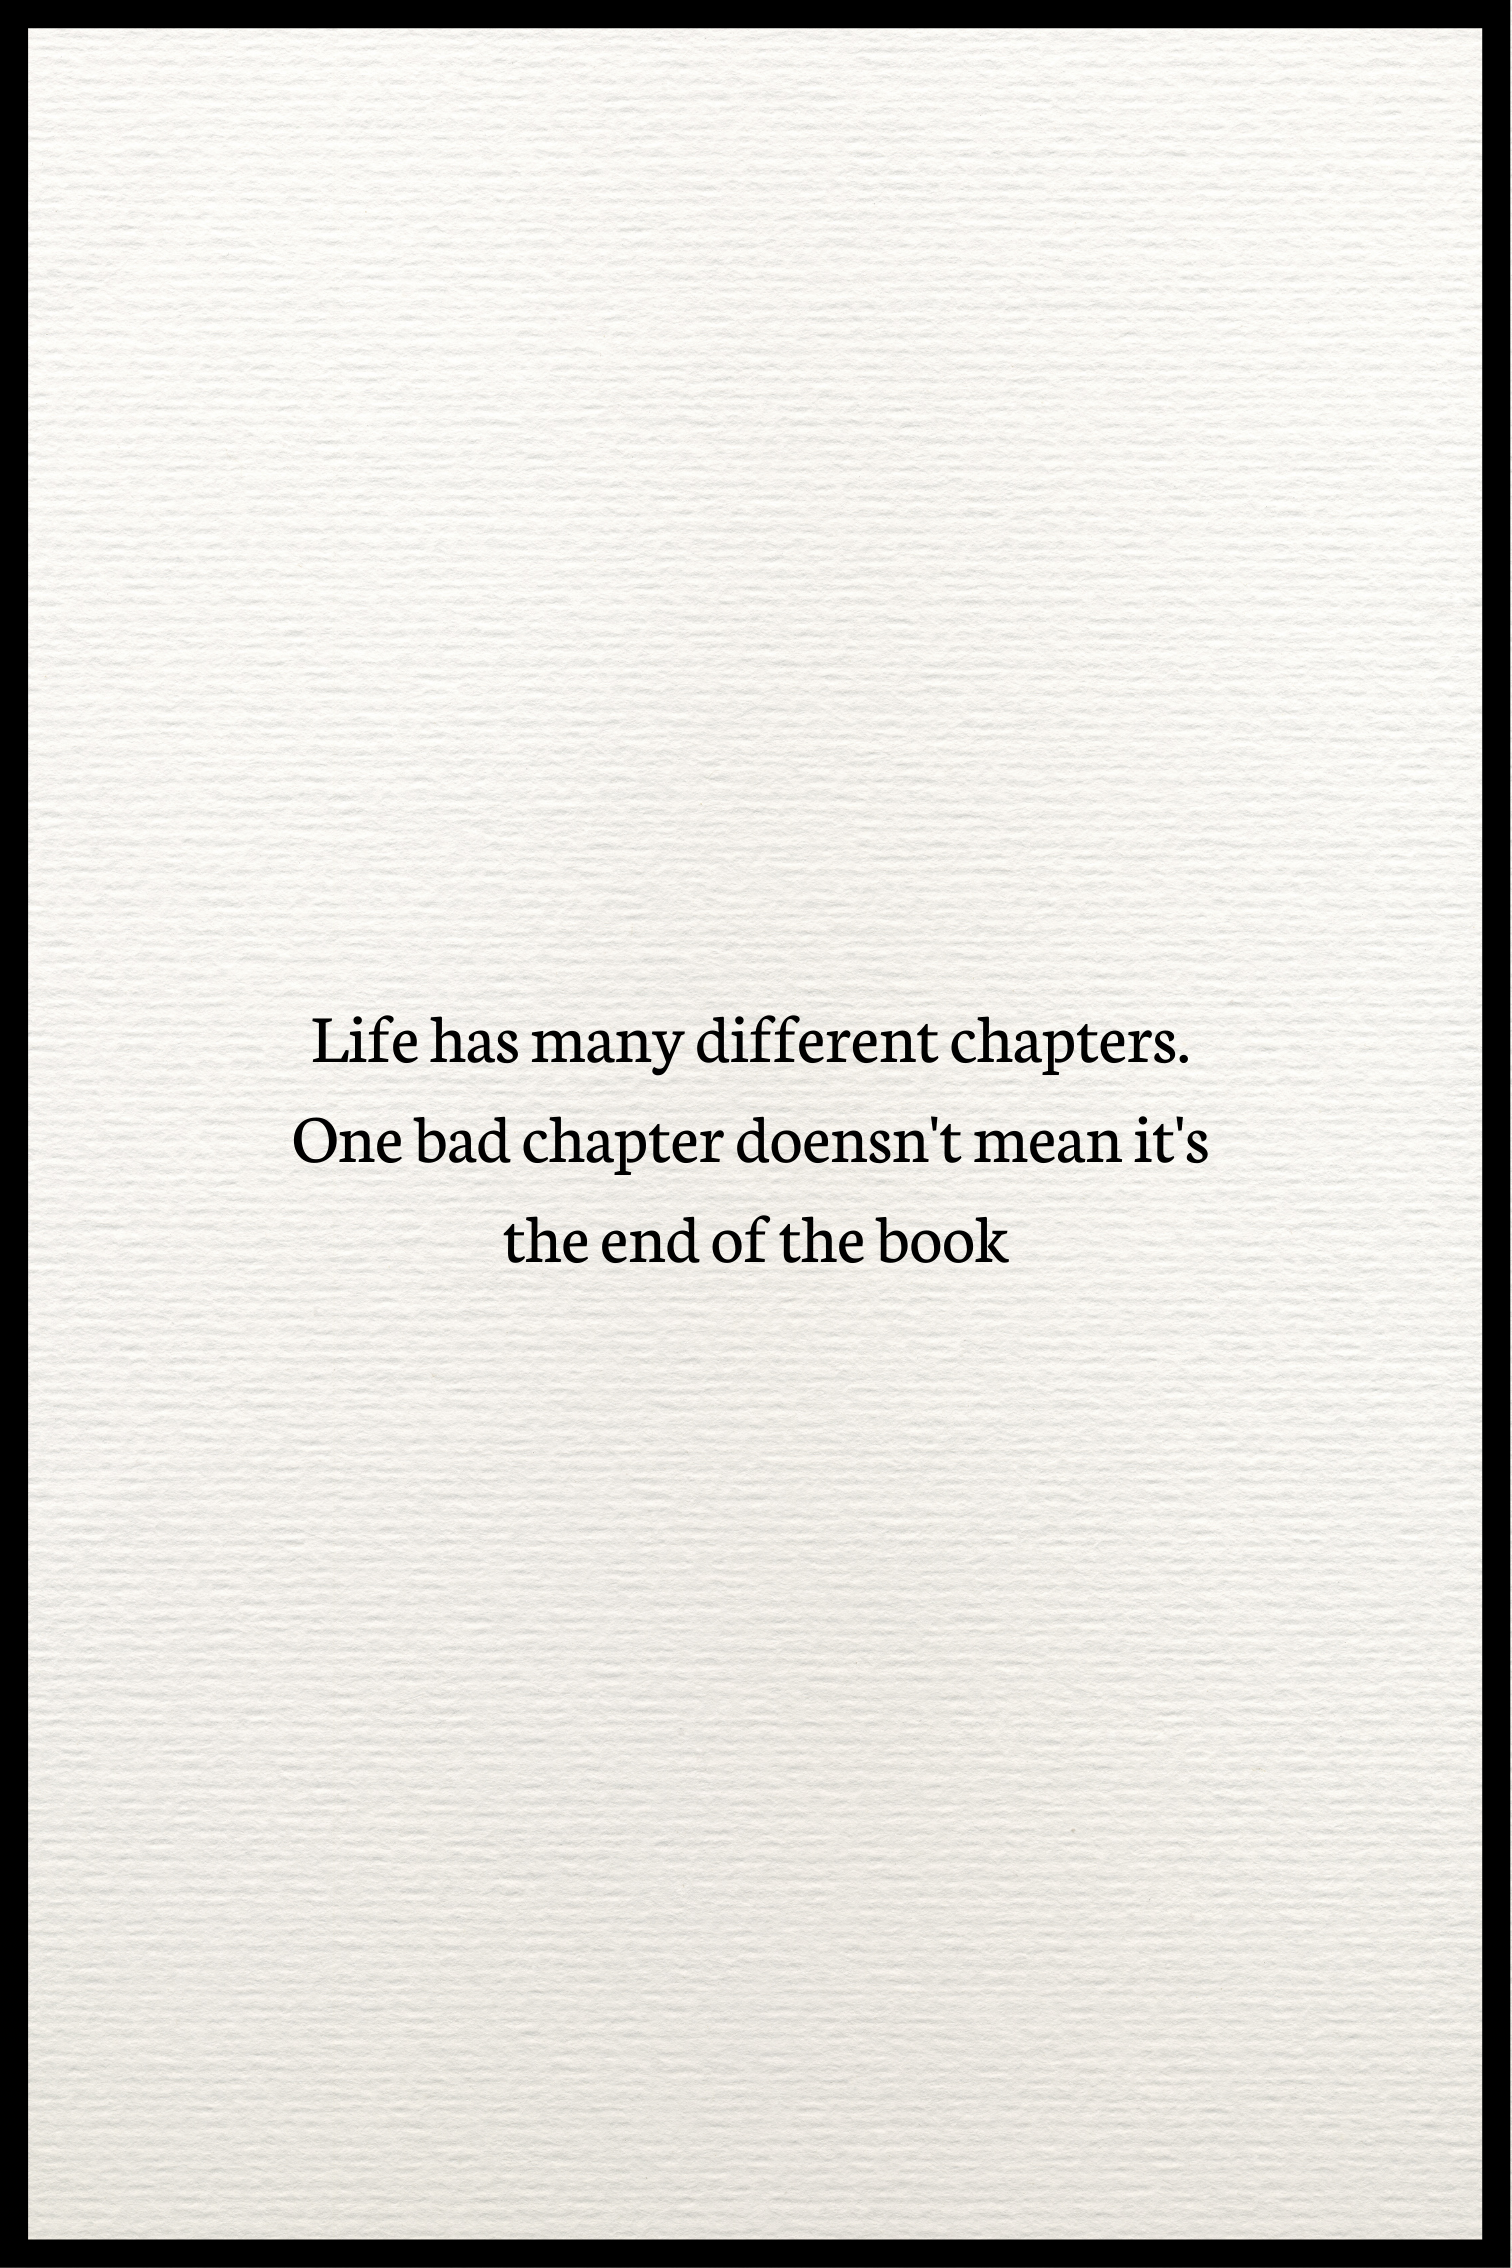 Life has many different chapters plakat